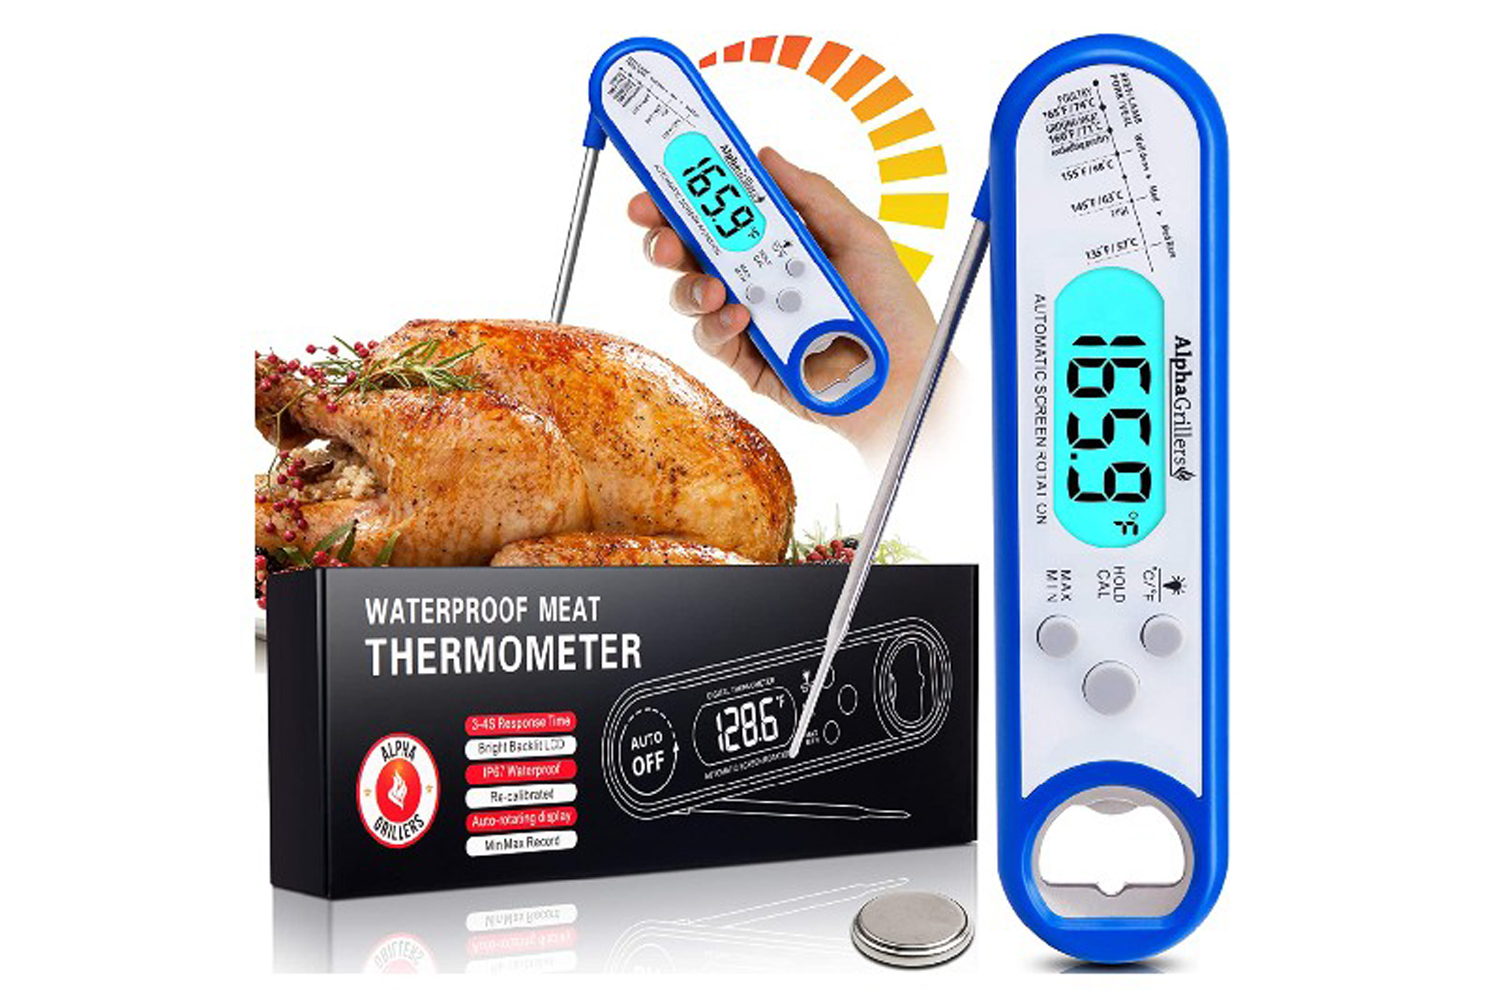 My Review of the ENZOO Wireless Meat Thermometer - Thermo Meat